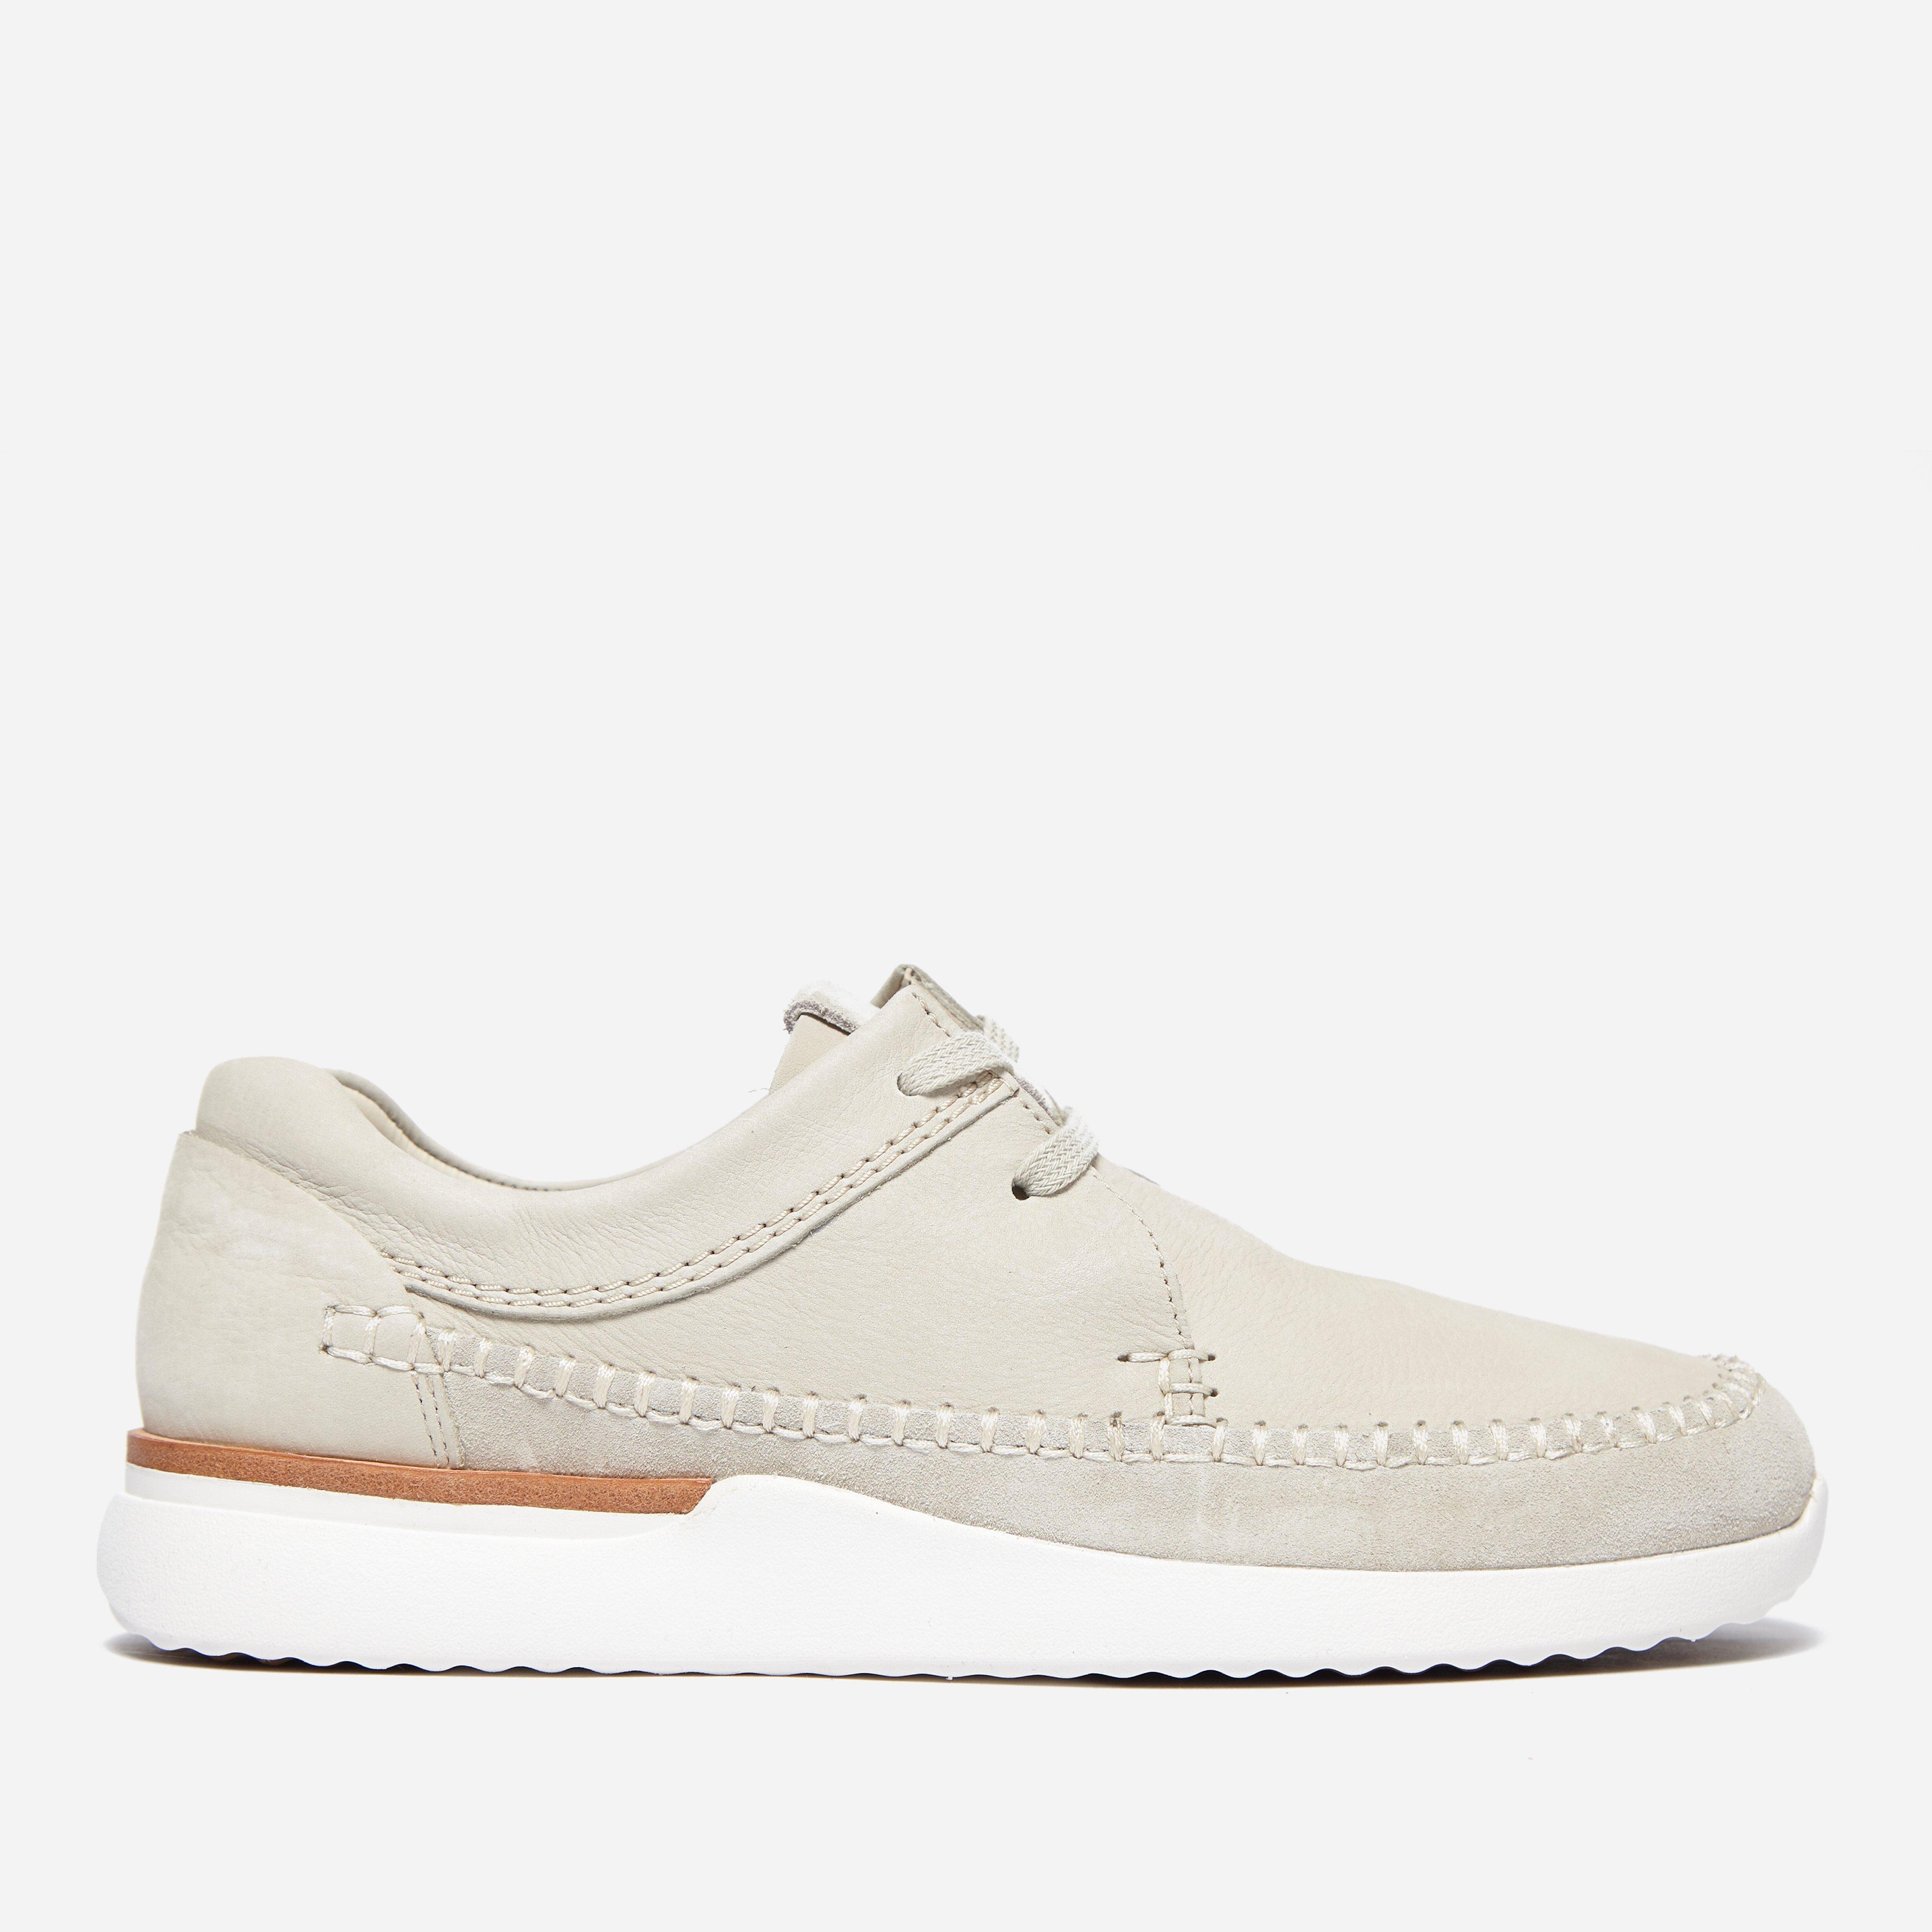 Clarks Suede Tor Track in White for Men - Lyst